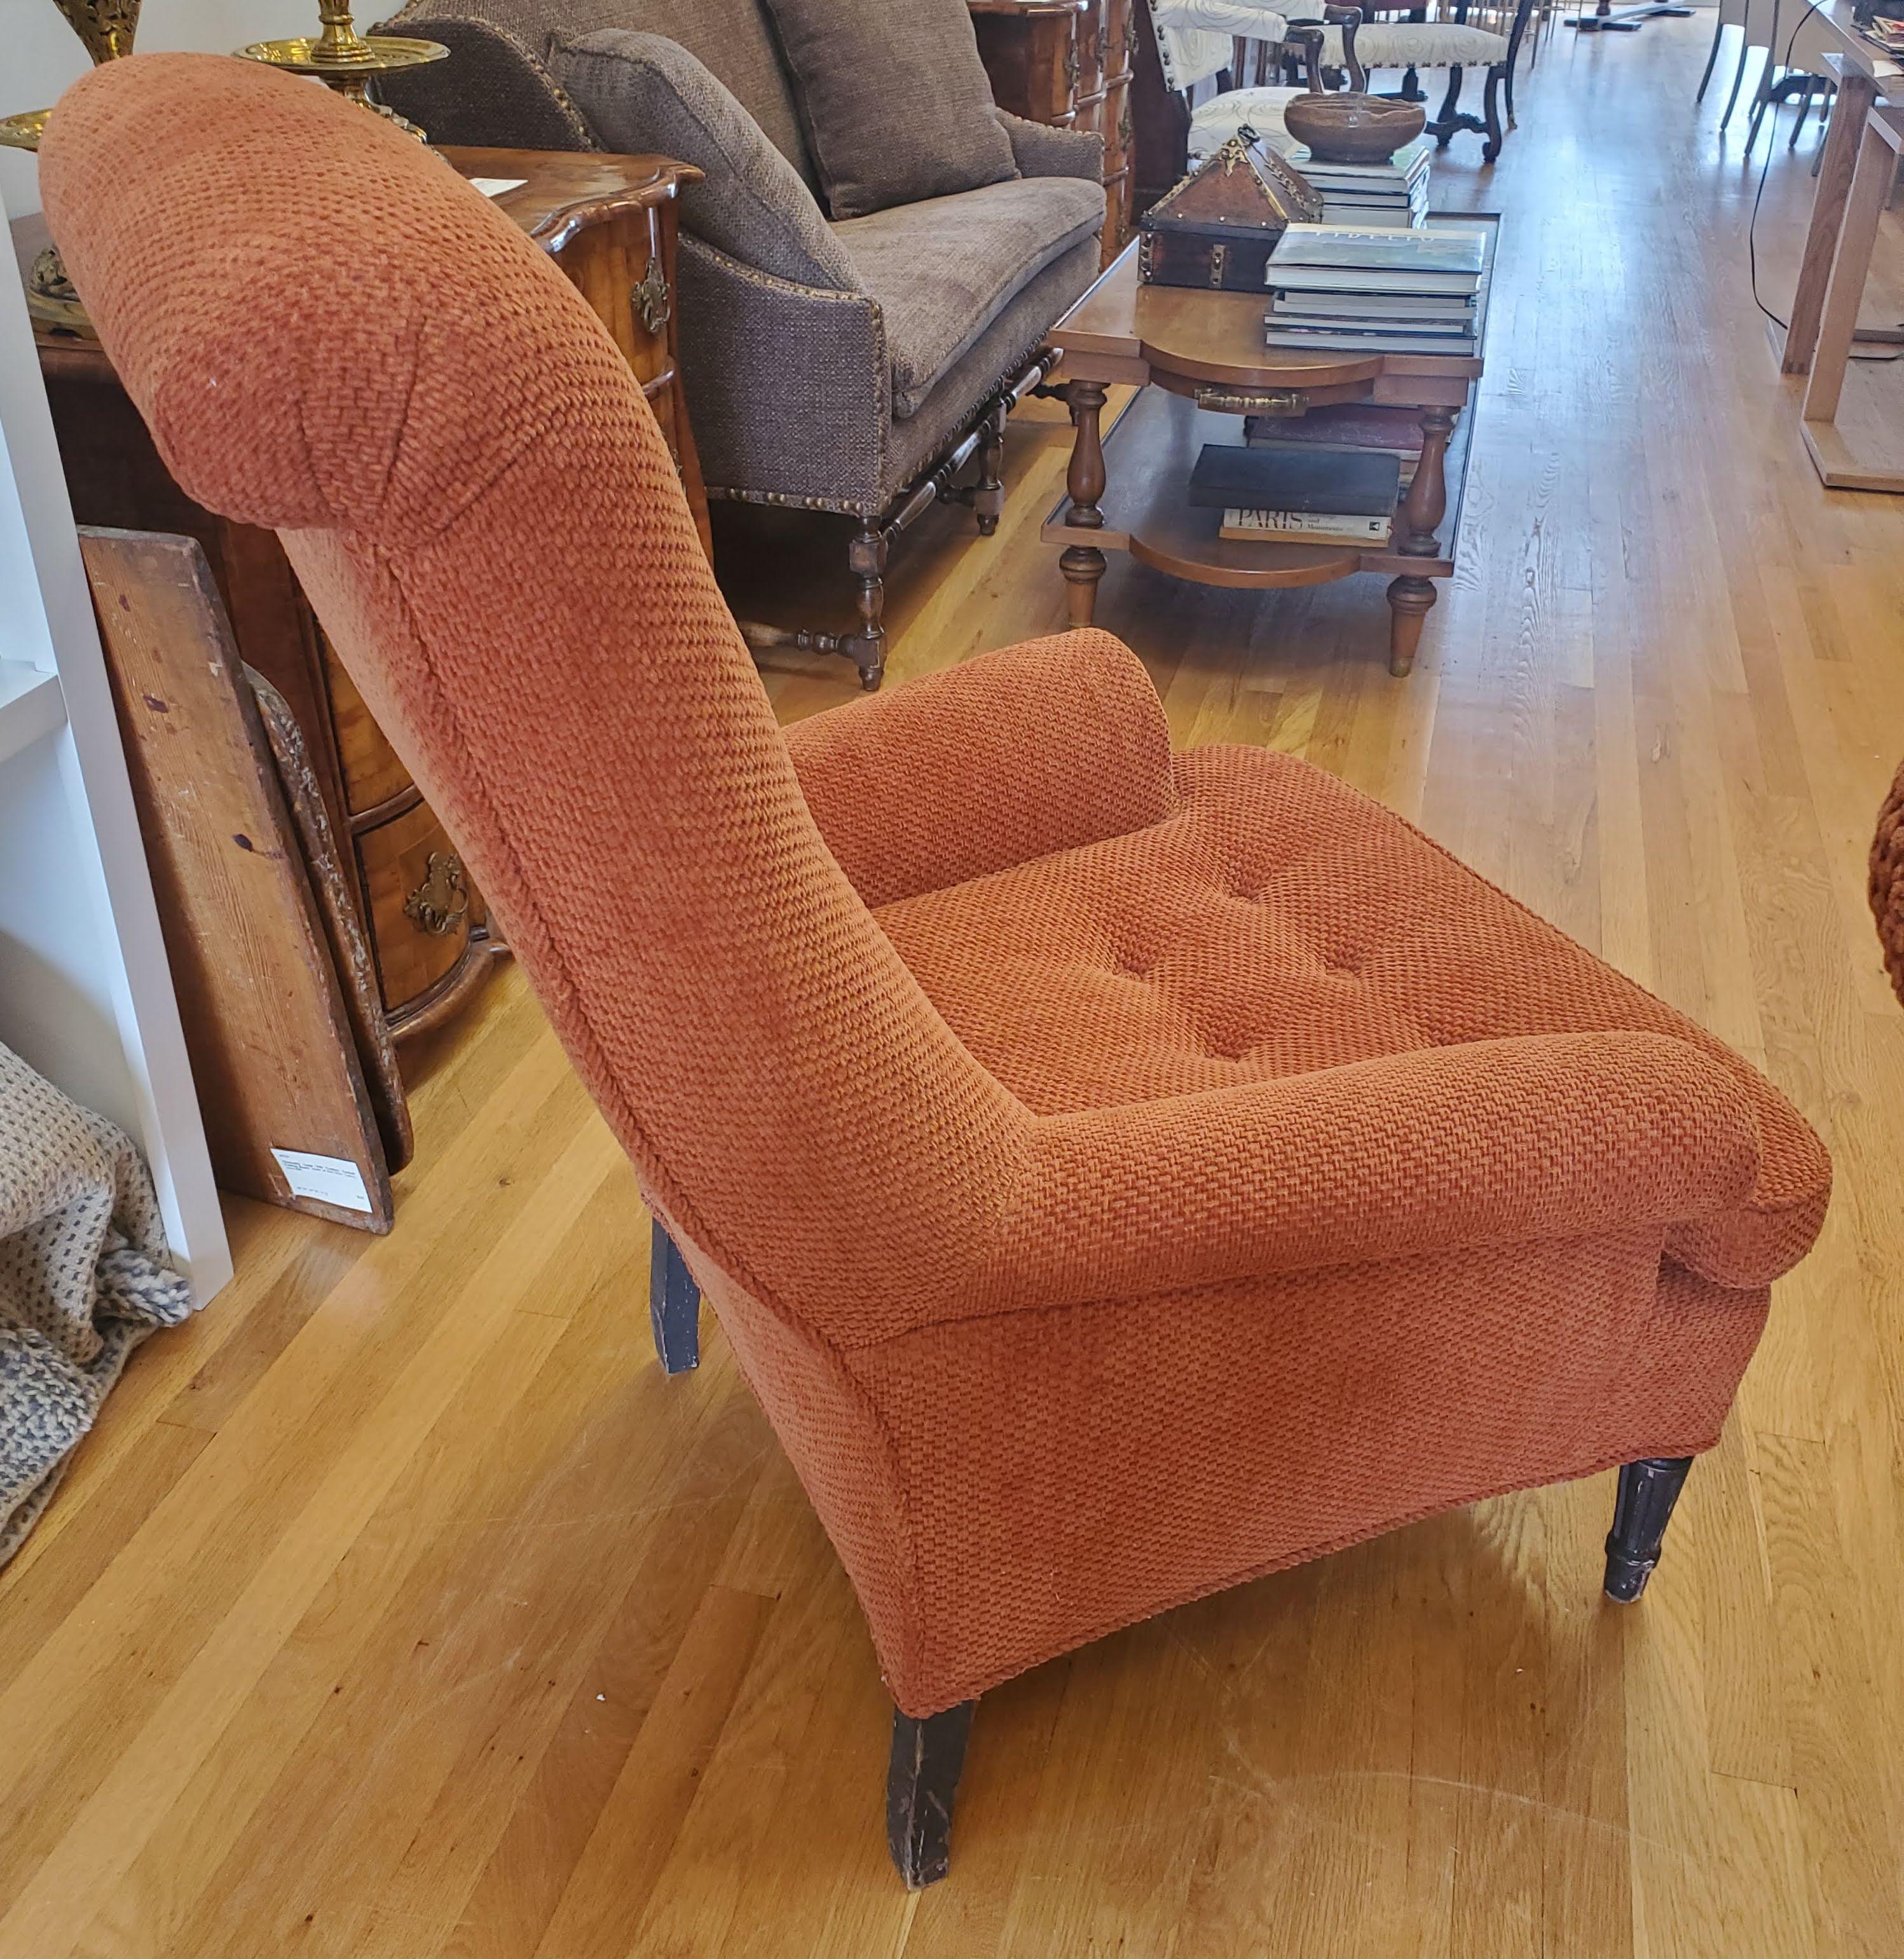 Pair of 19th Century English Club Chairs with Orange Chenille Upholstery For Sale 2